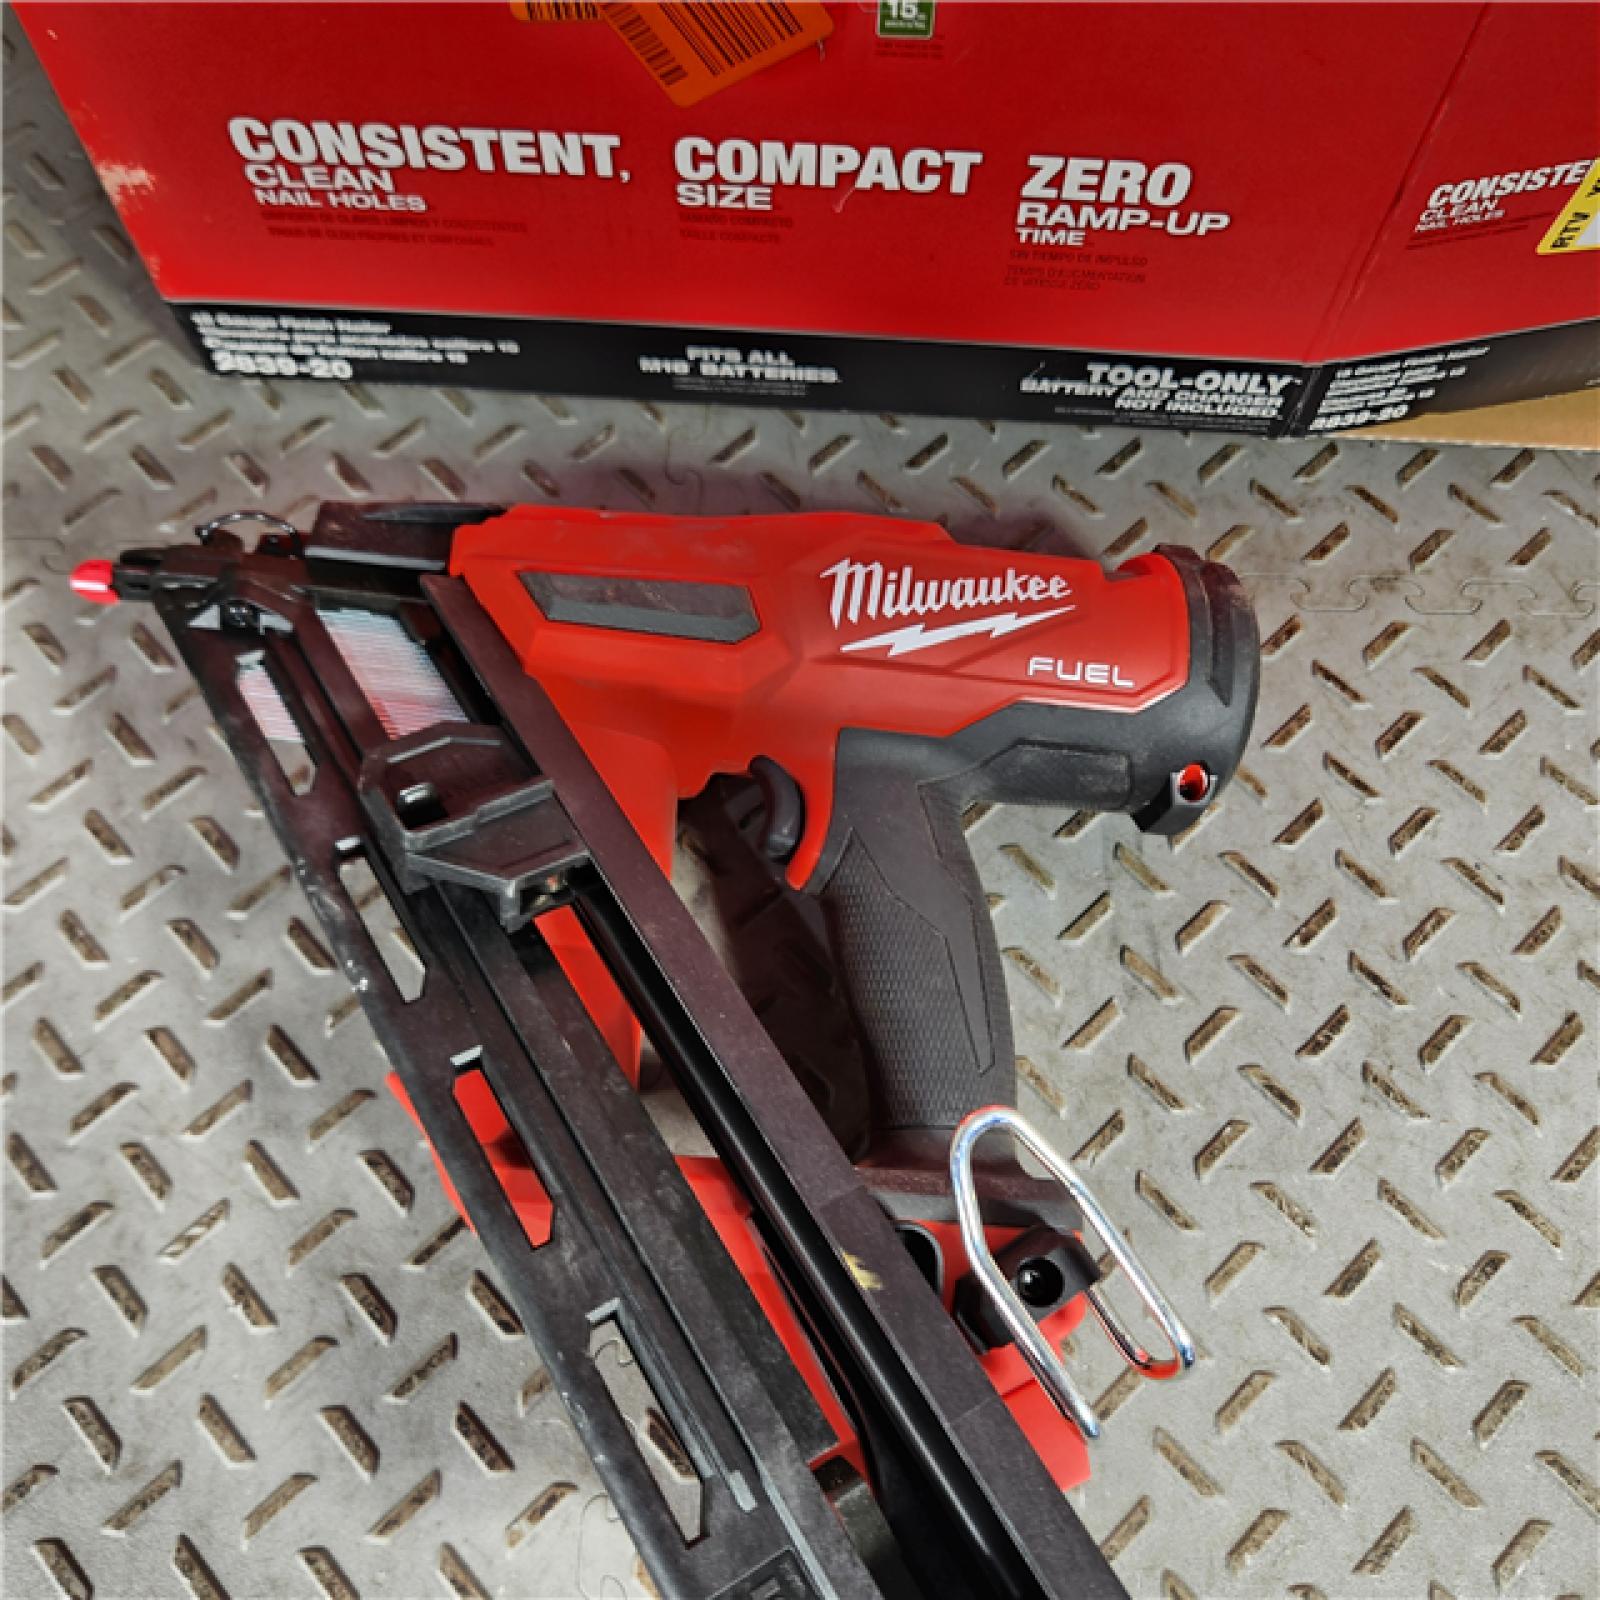 Houston location- AS-IS Milwaukee 2839-20 18V Cordless Gen II 15 Gauge Angled Finish Nailer (Tool Only)